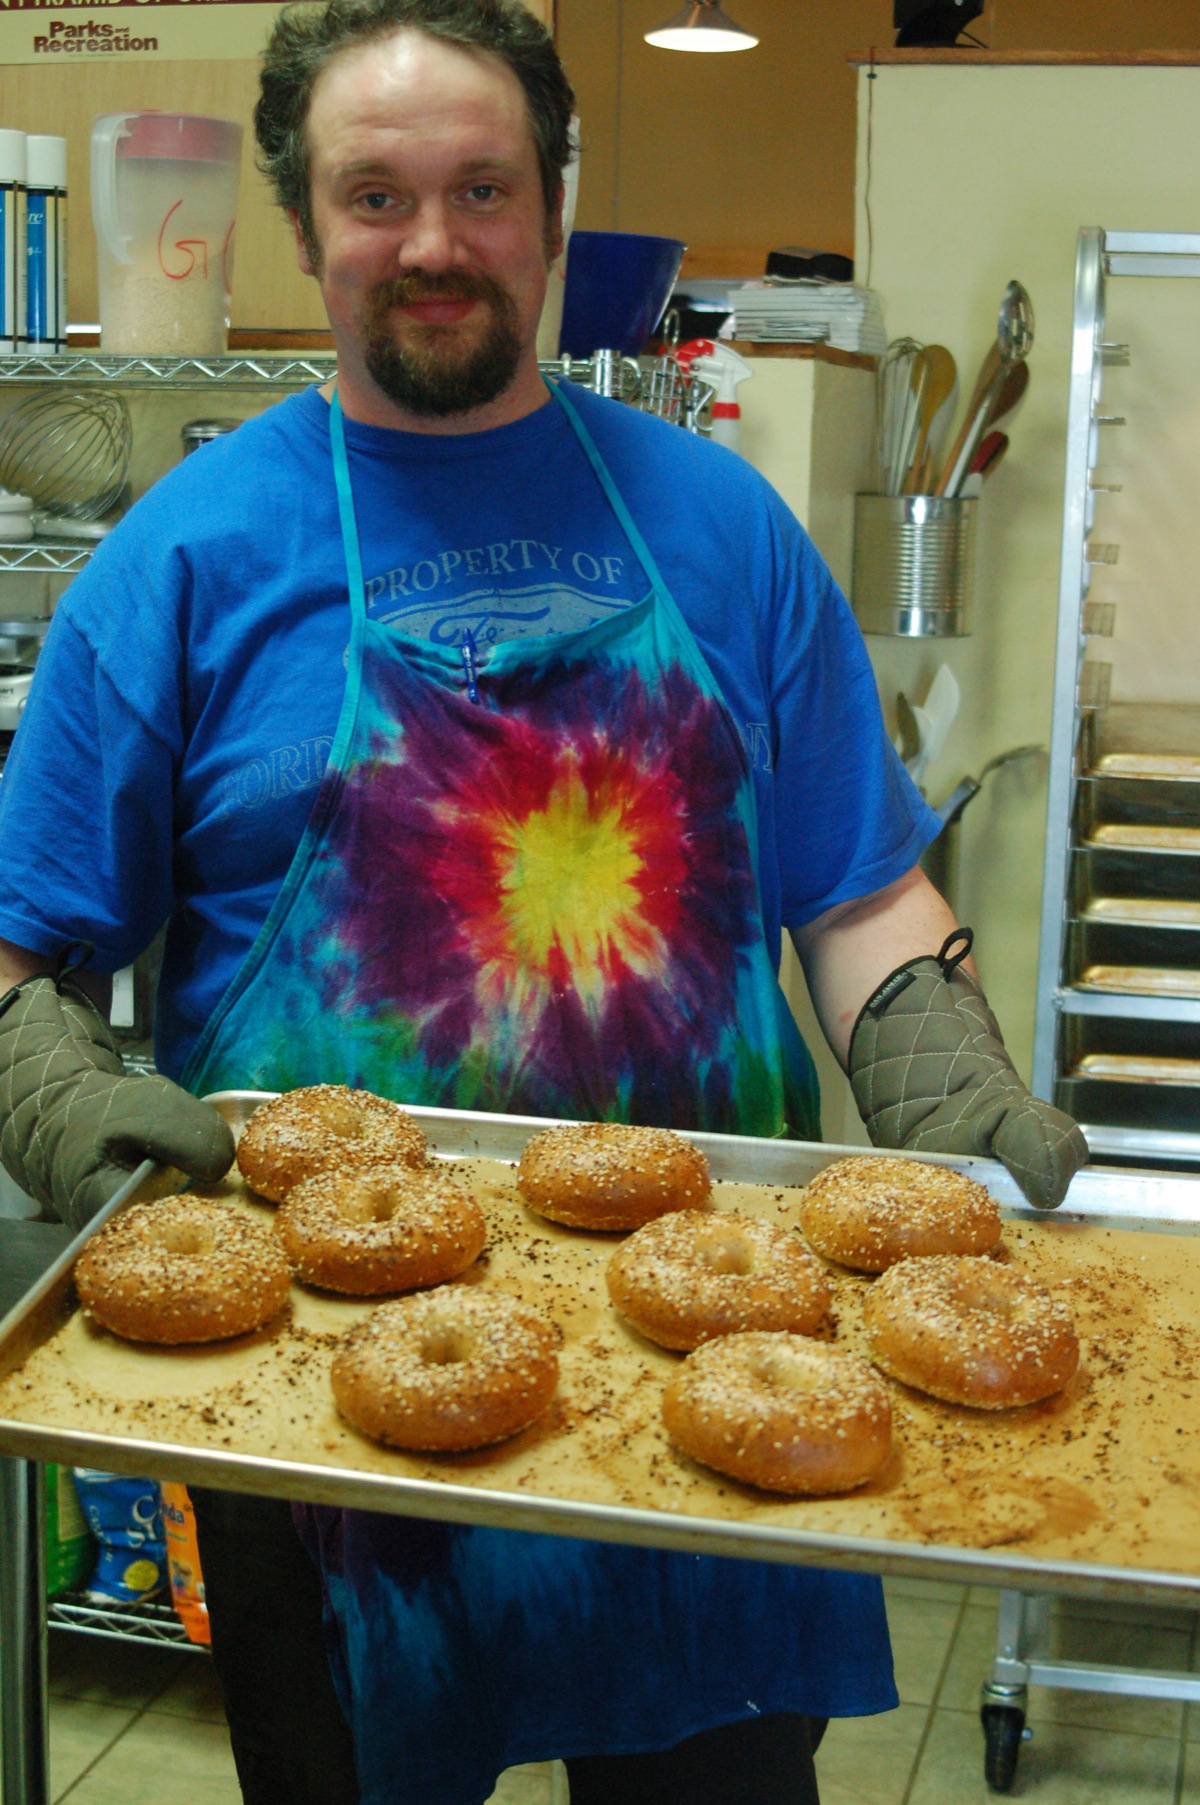 Spice mixtures and sea salt are sprinkled on the coated bagels, the final step before baking.